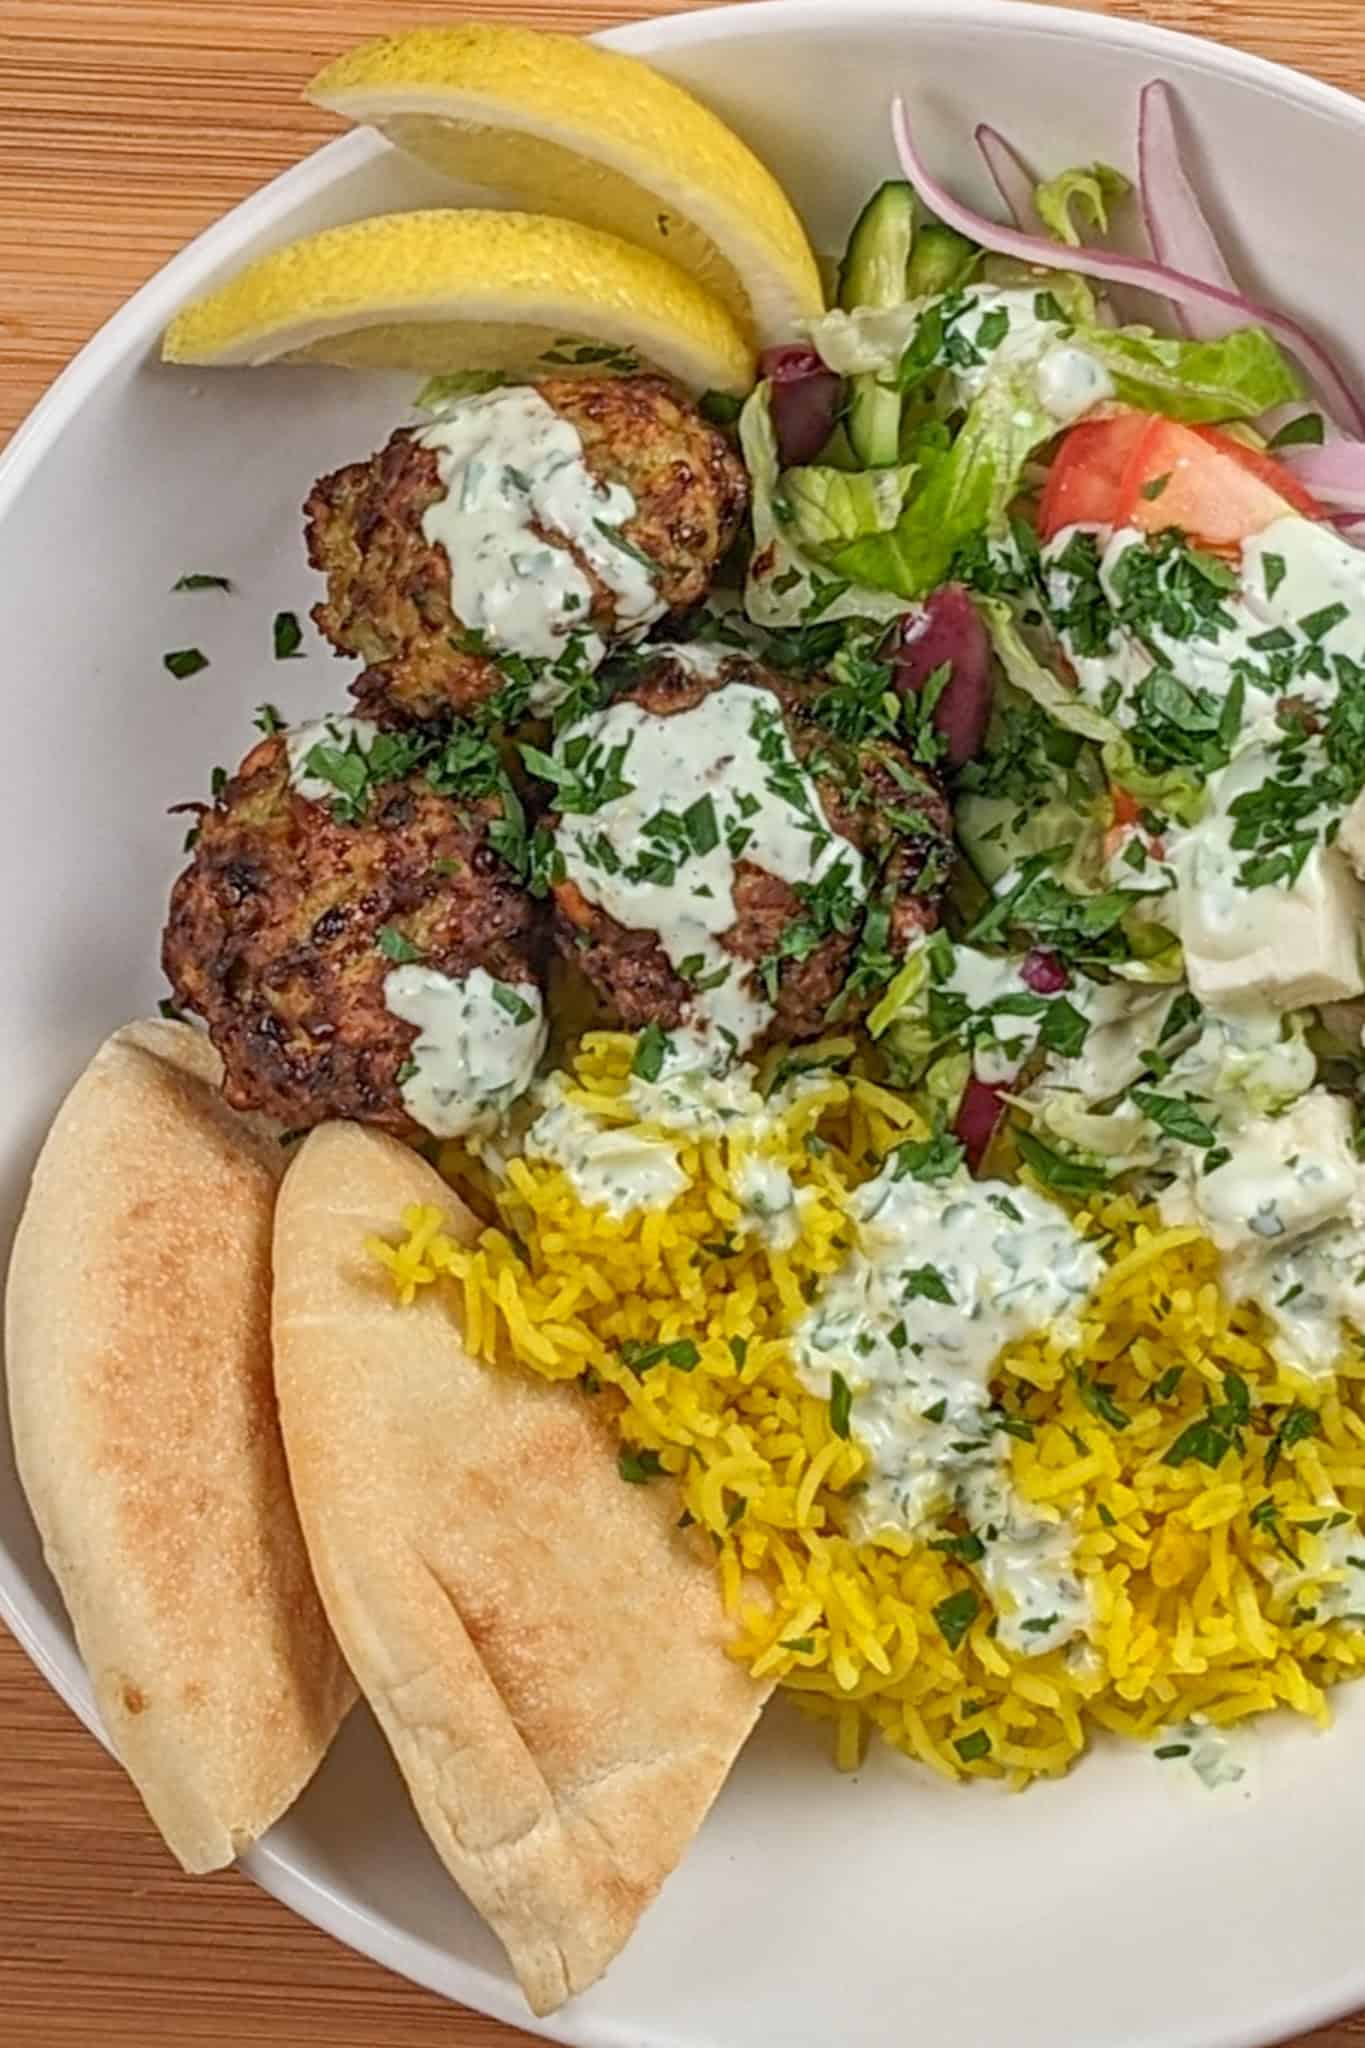 The Spicy Greek Chicken Meatball Rice Bowl in a wide rim bowl drizzled with yogurt sauce and garnished with chopped parsley, pita triangles and lemon wedges.